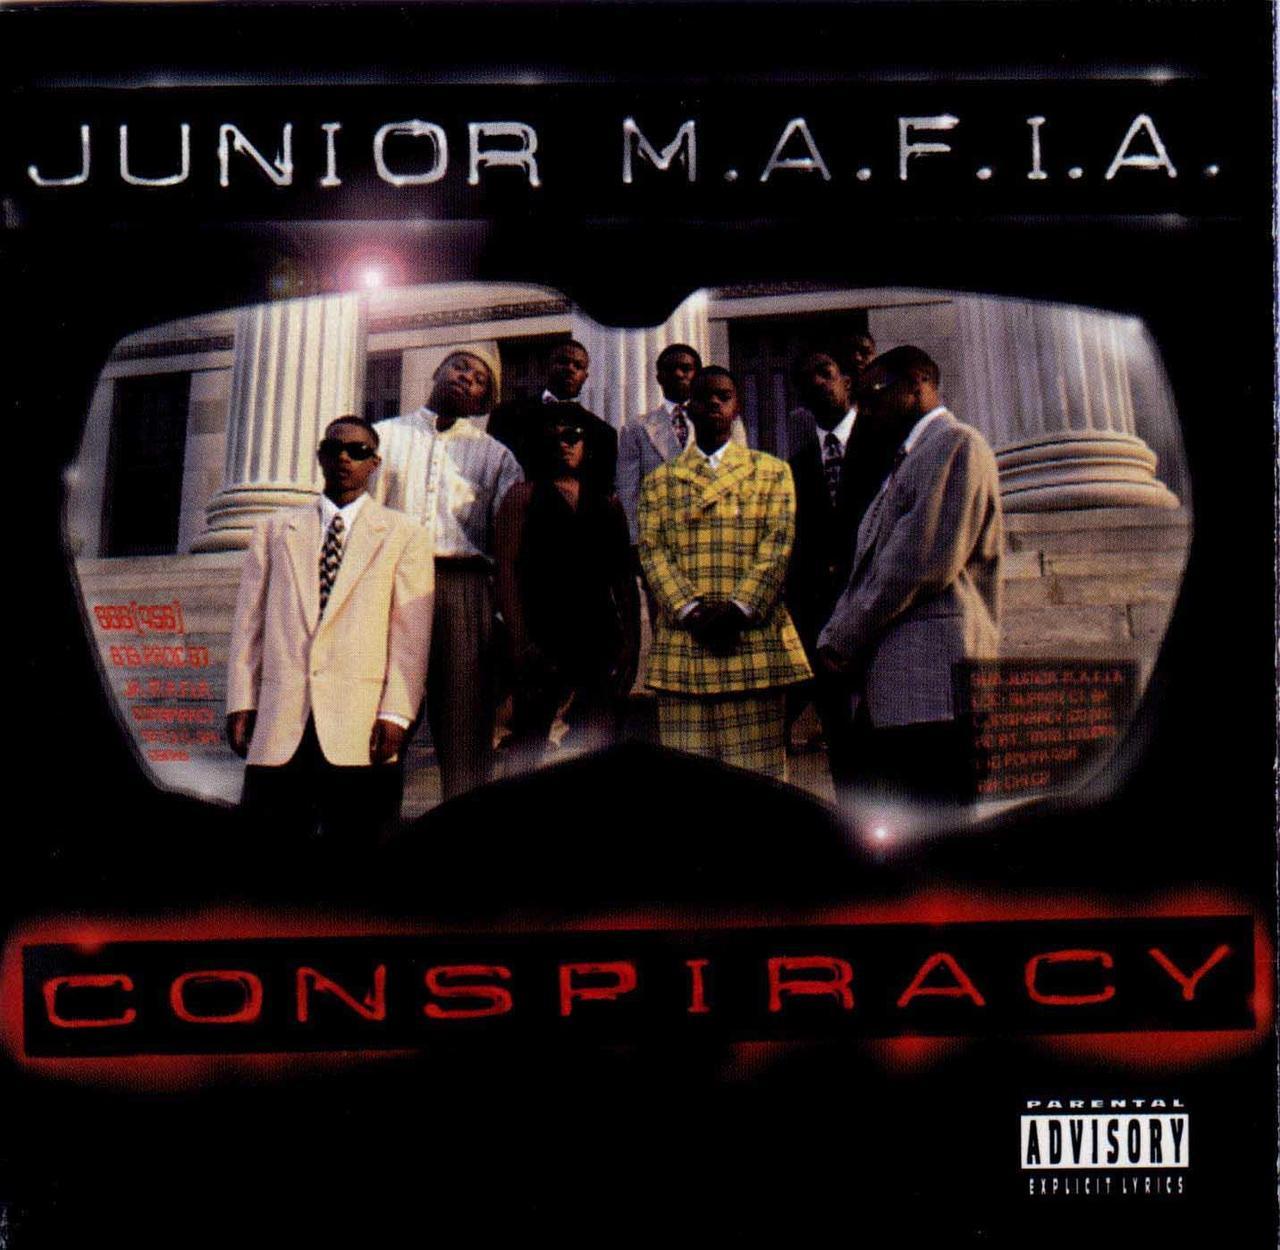 BACK IN THE DAY |8/29/95| Junior M.A.F.I.A. releases their debut album, Conspiracy,